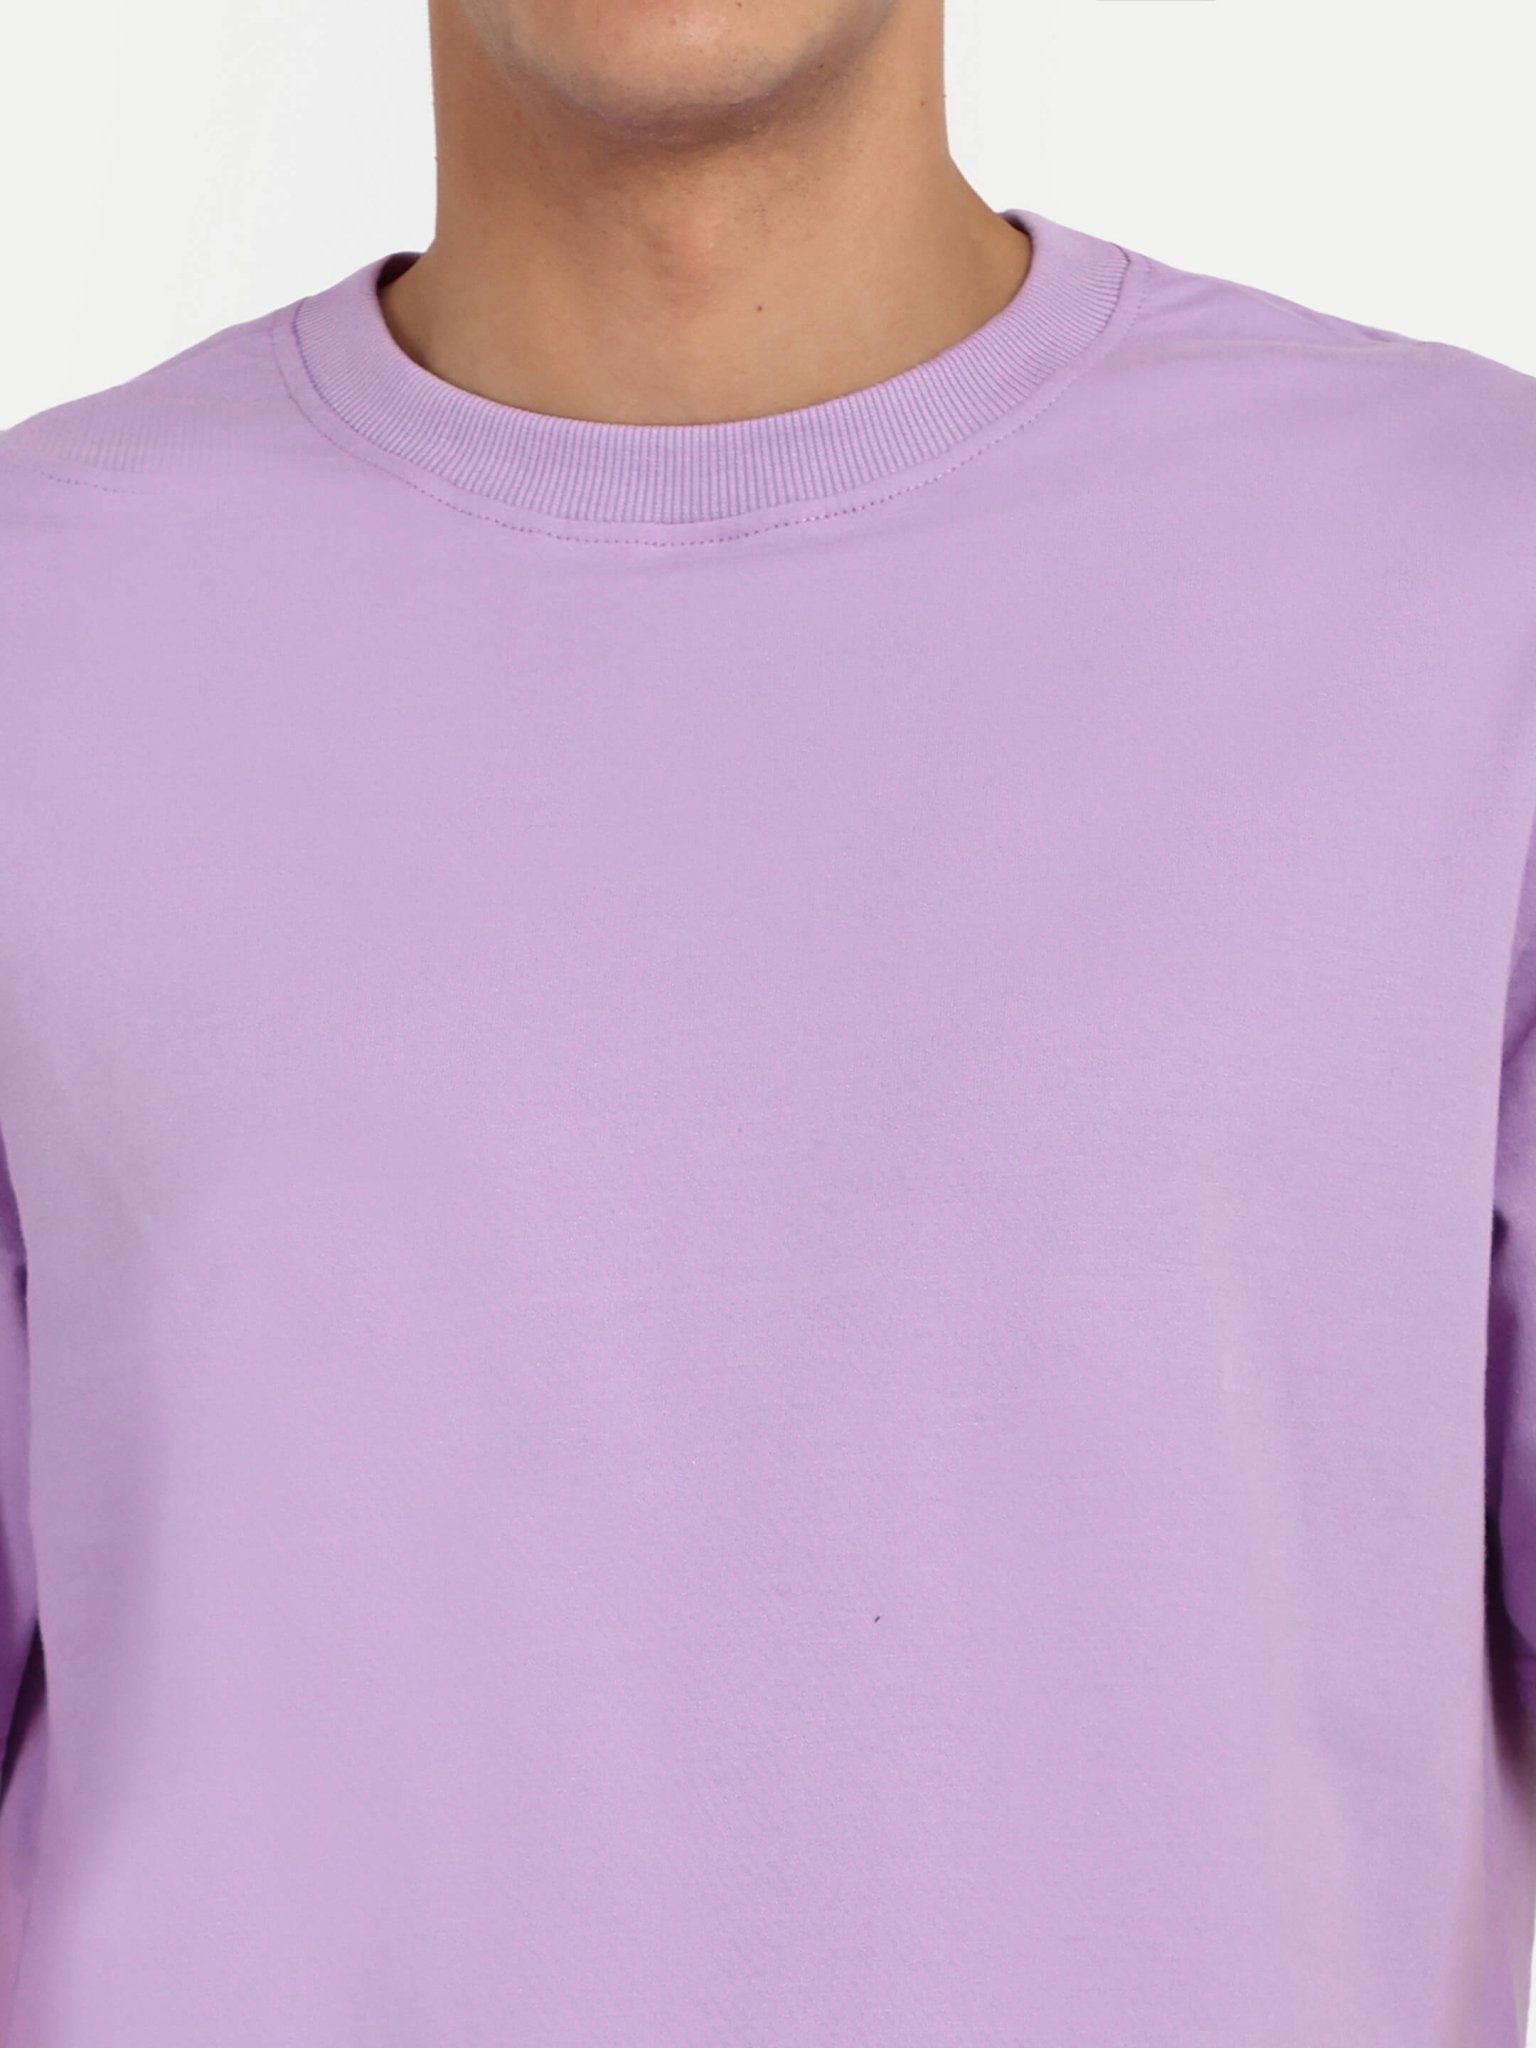 Relaxed Basic T-Shirt - Lavender Bright